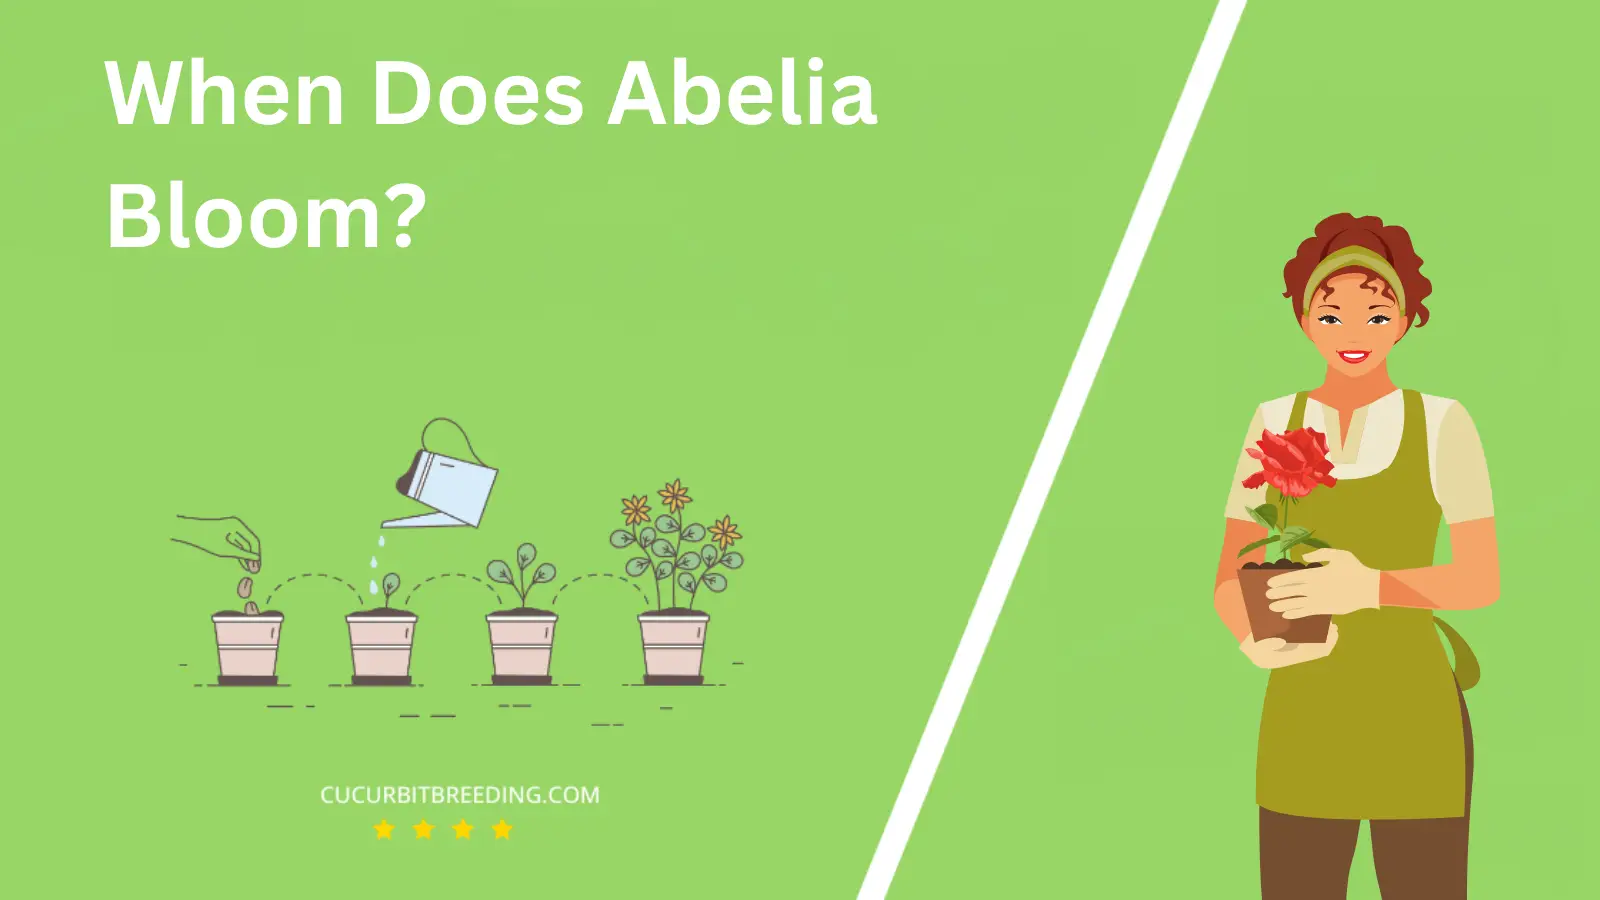 When Does Abelia Bloom?